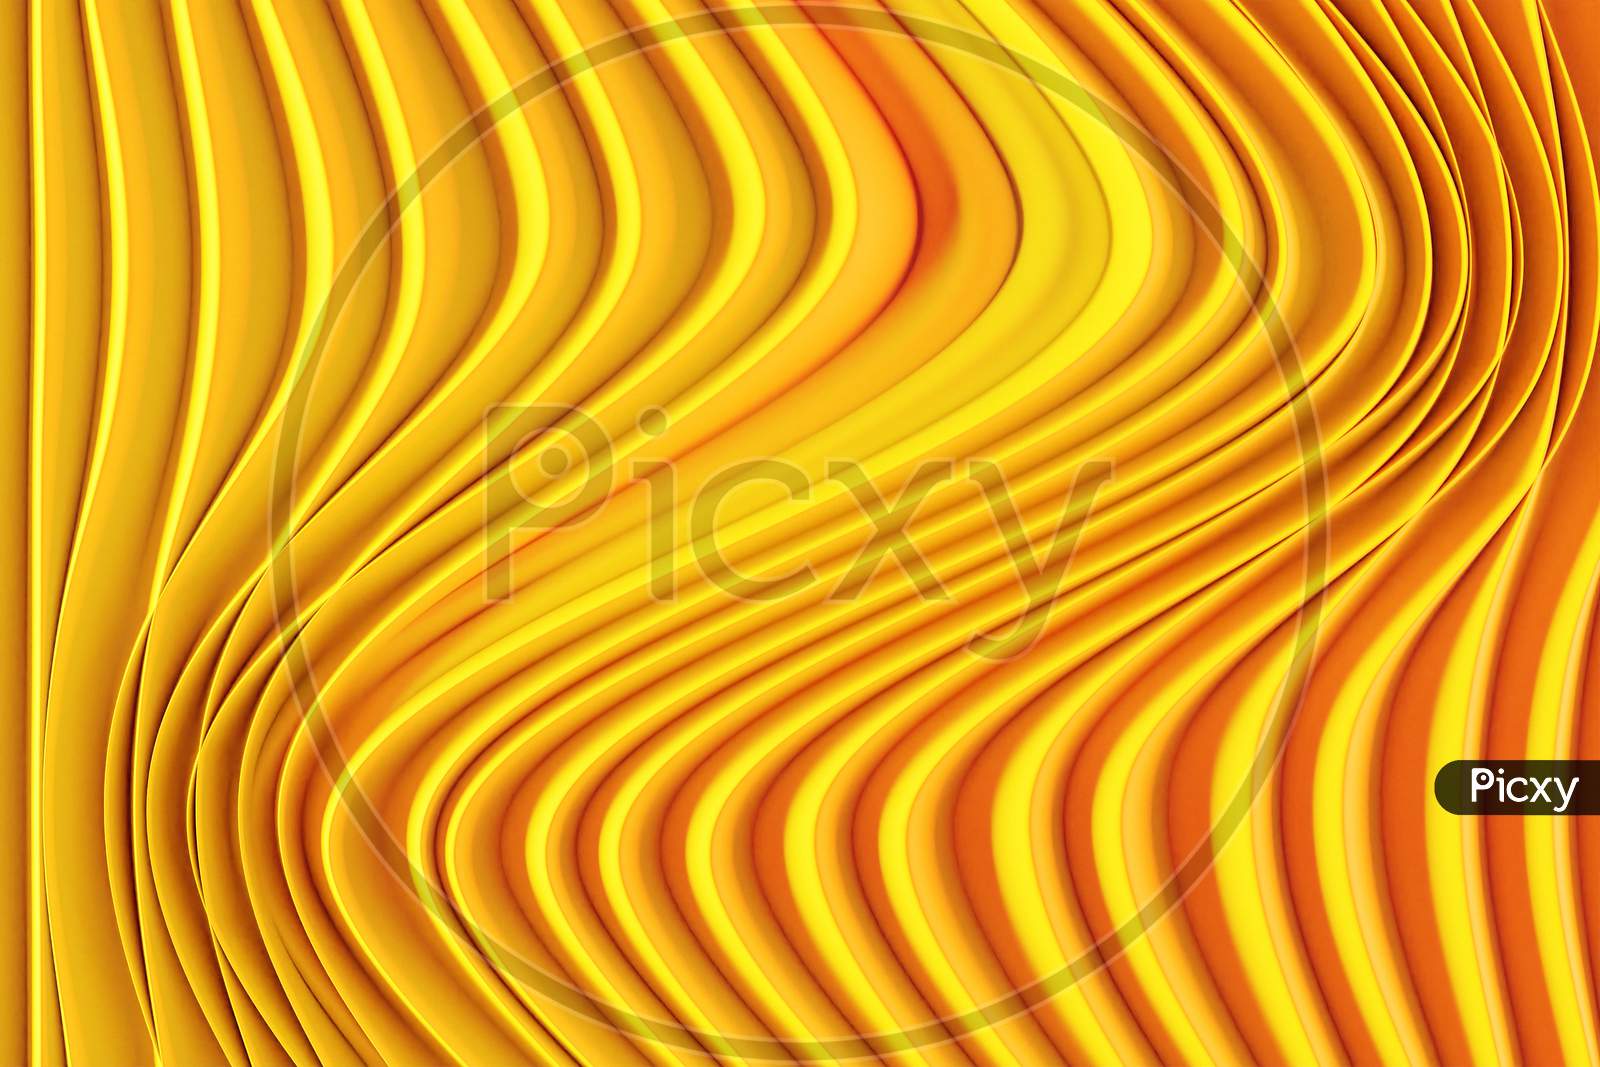 3D Illustration Of A Stereo Strip Of Different Colors. Geometric Stripes Similar To Waves. Abstract  Yellow Glowing Crossing Lines Pattern